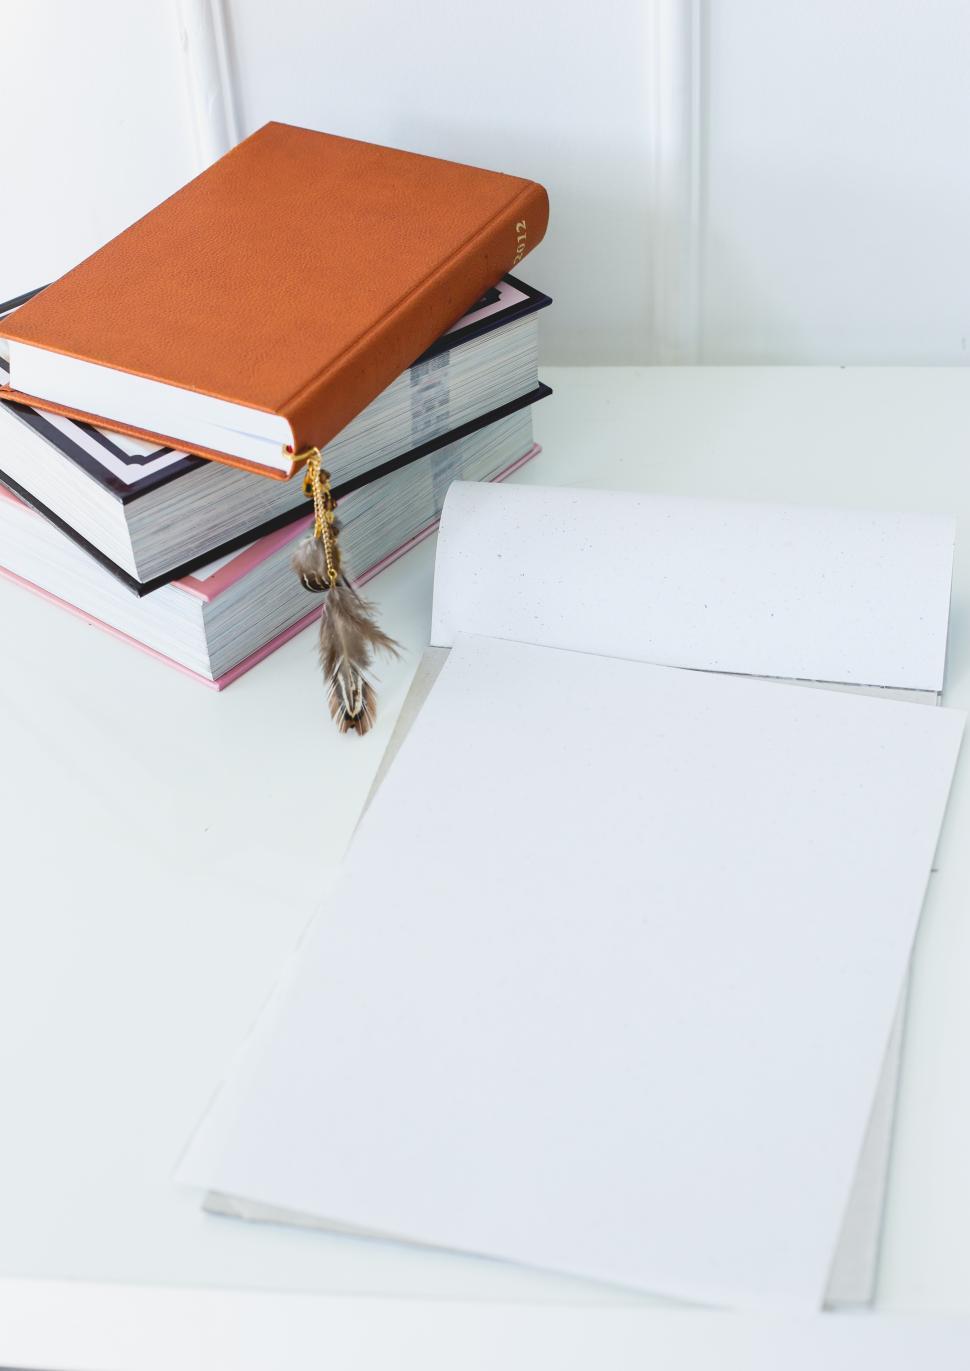 Free Image of Notepad and books on the table 